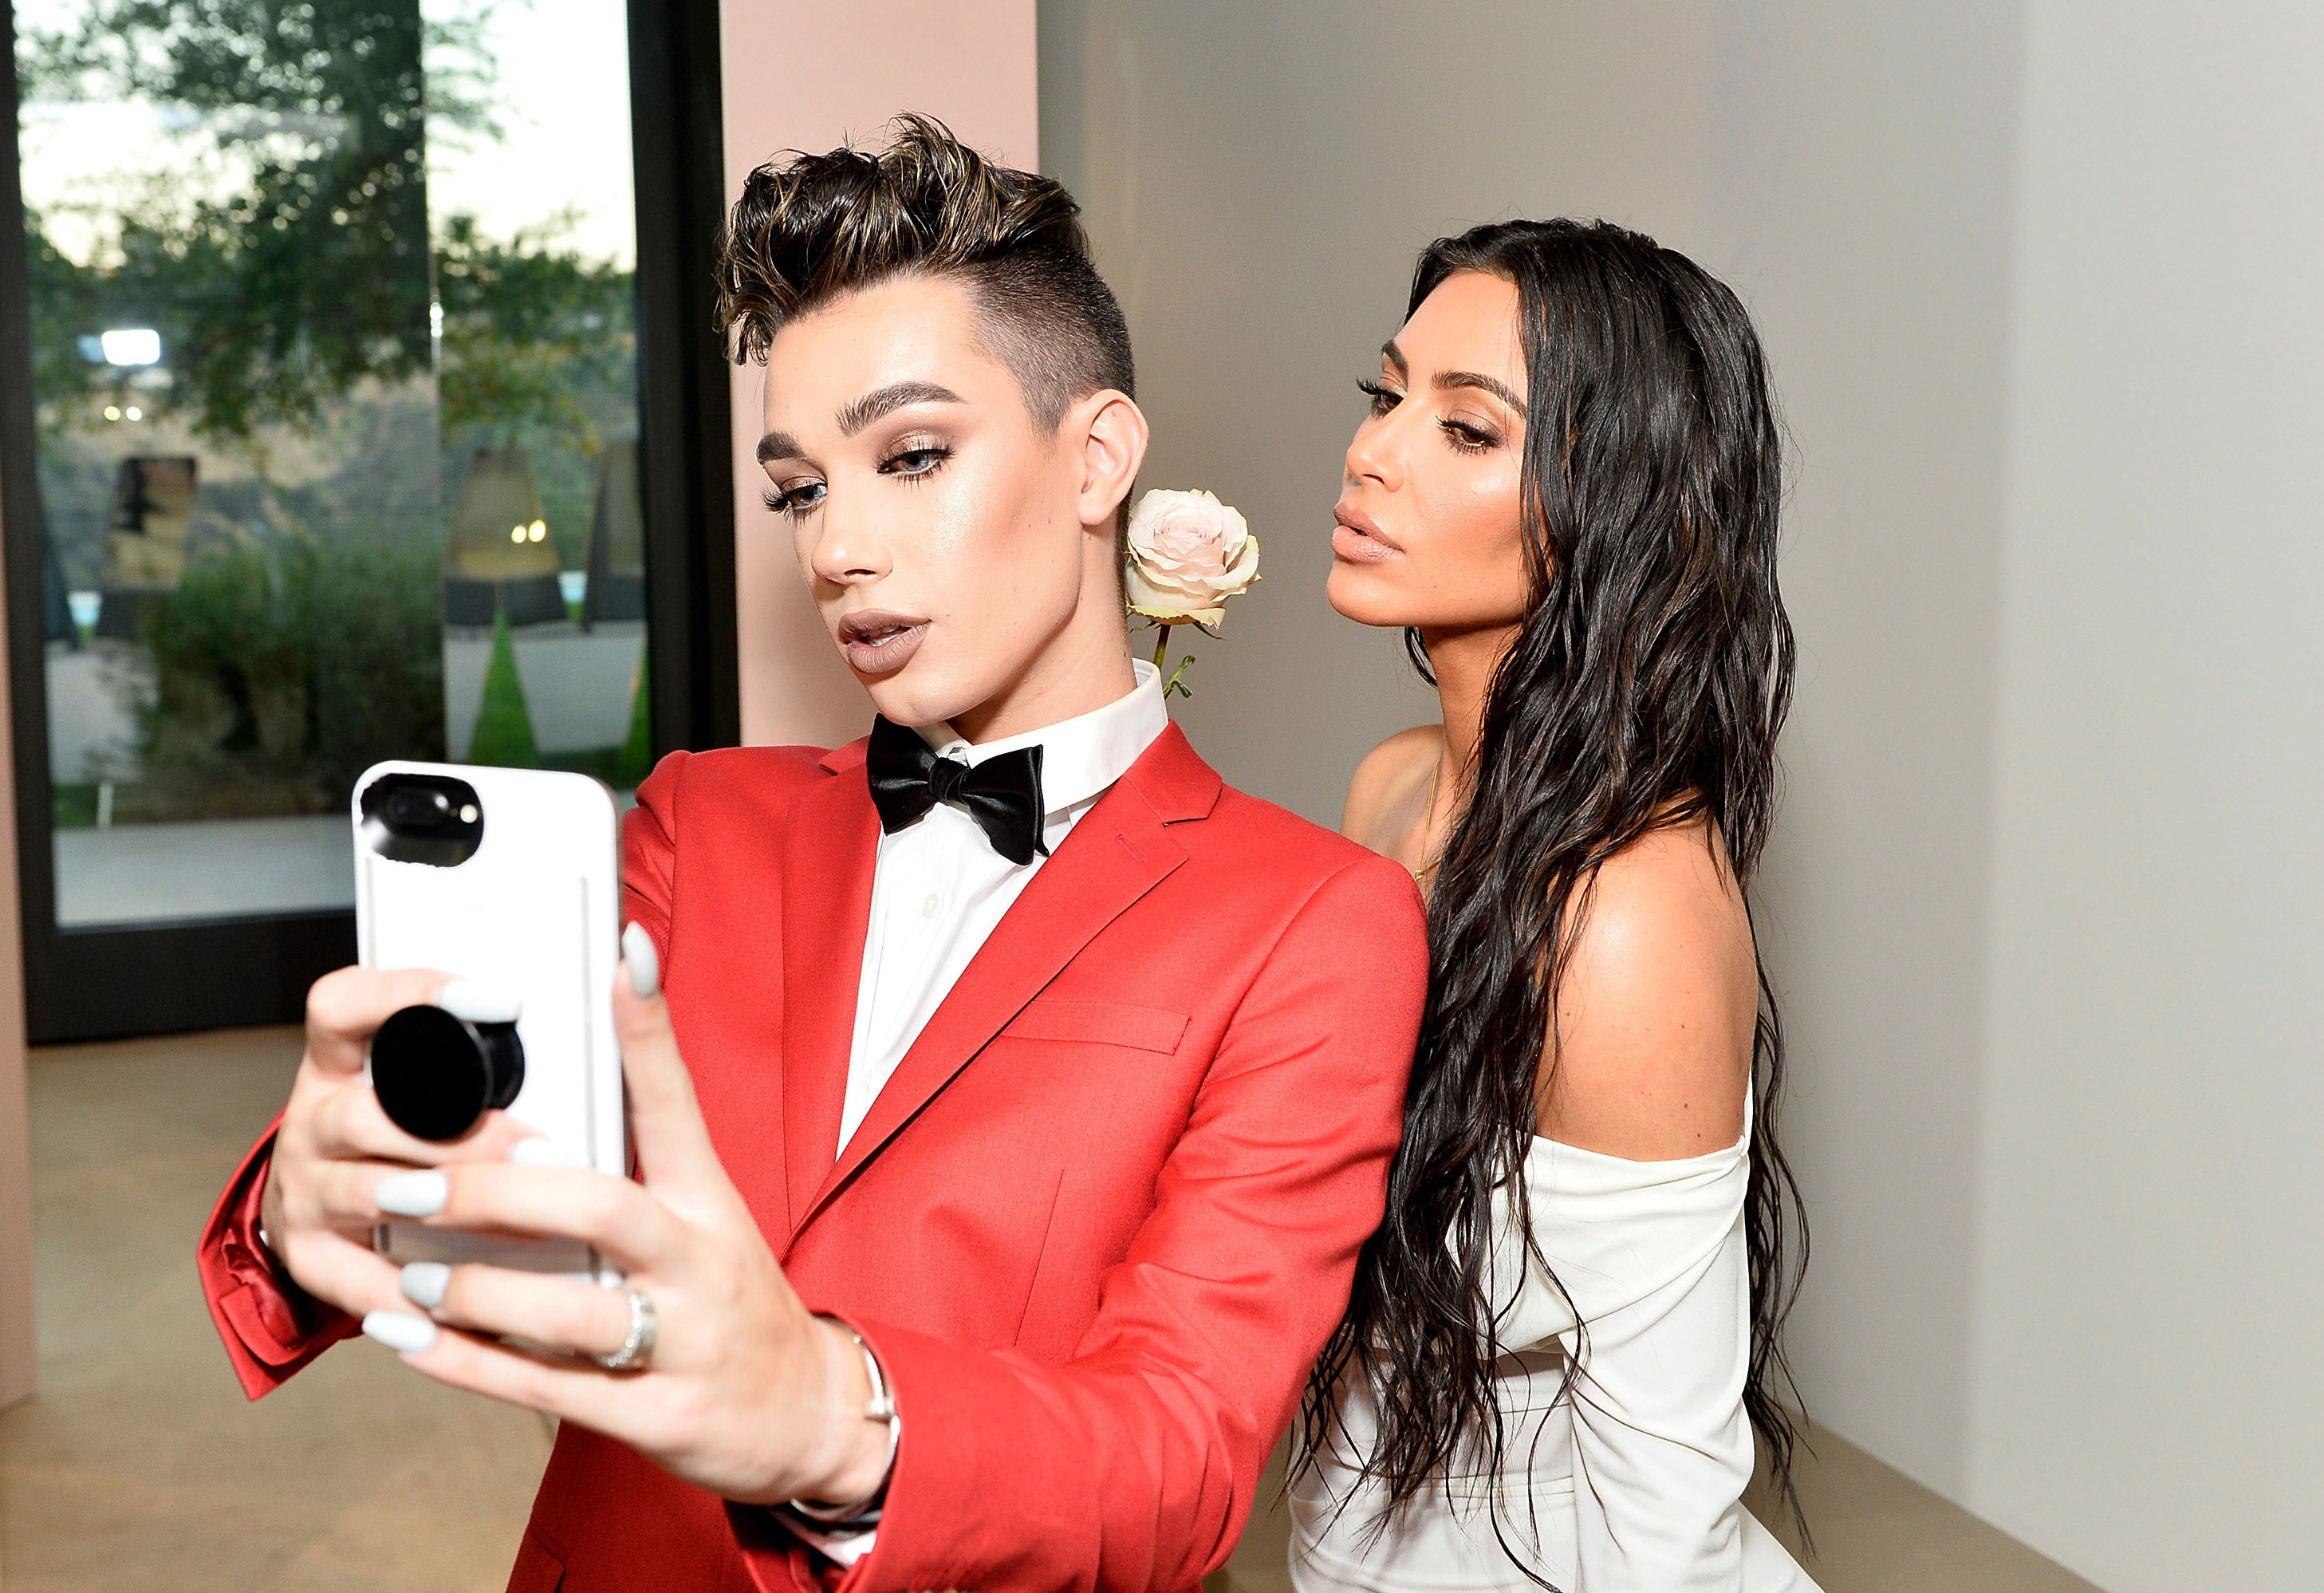 James Charles Calls Out Kim Kardashian For Only Casting Women